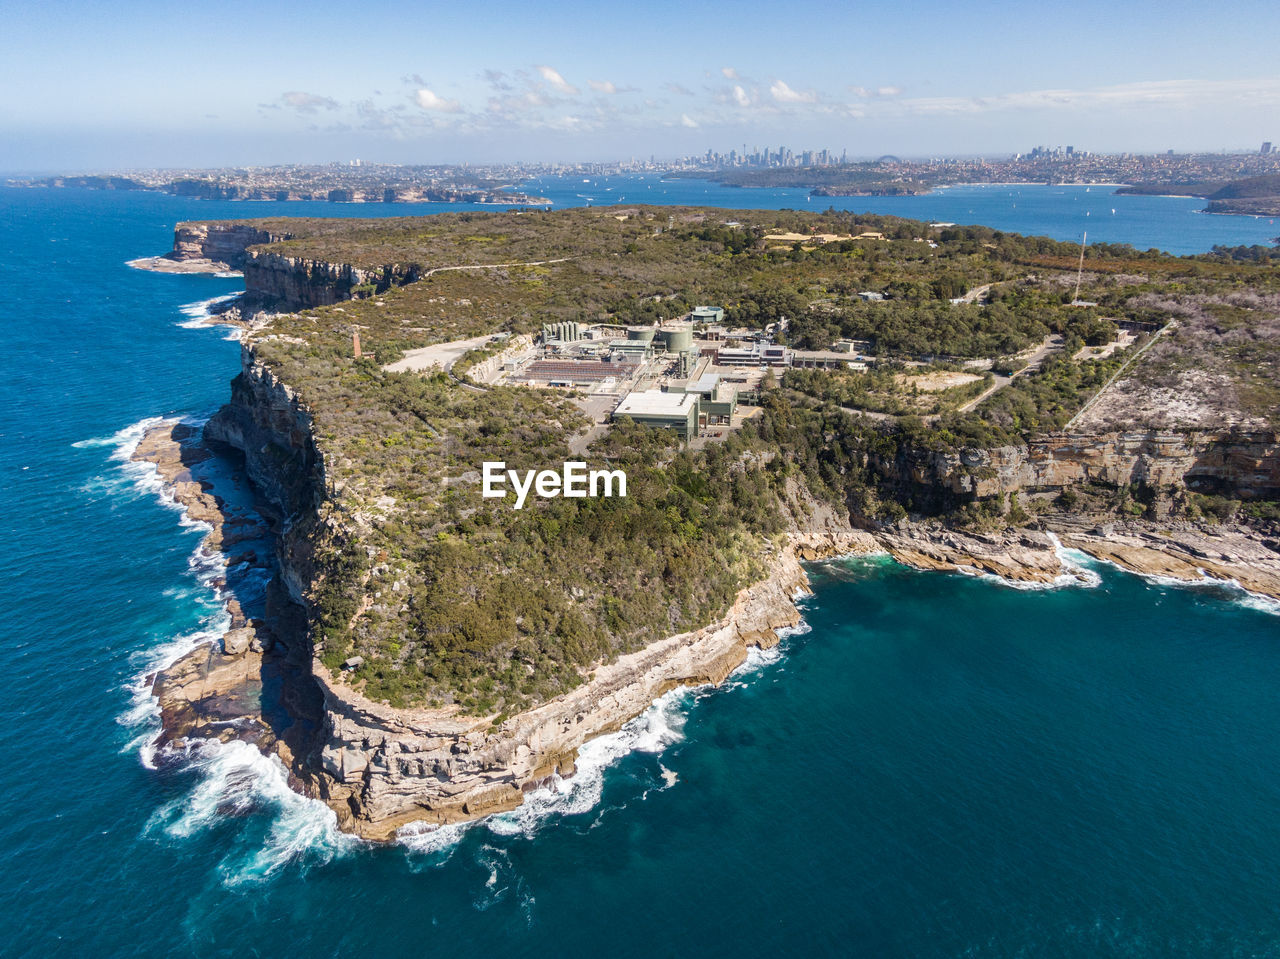 Drone view of north head in manly, sydney, nsw, australia. wastewater treatment plant in foreground